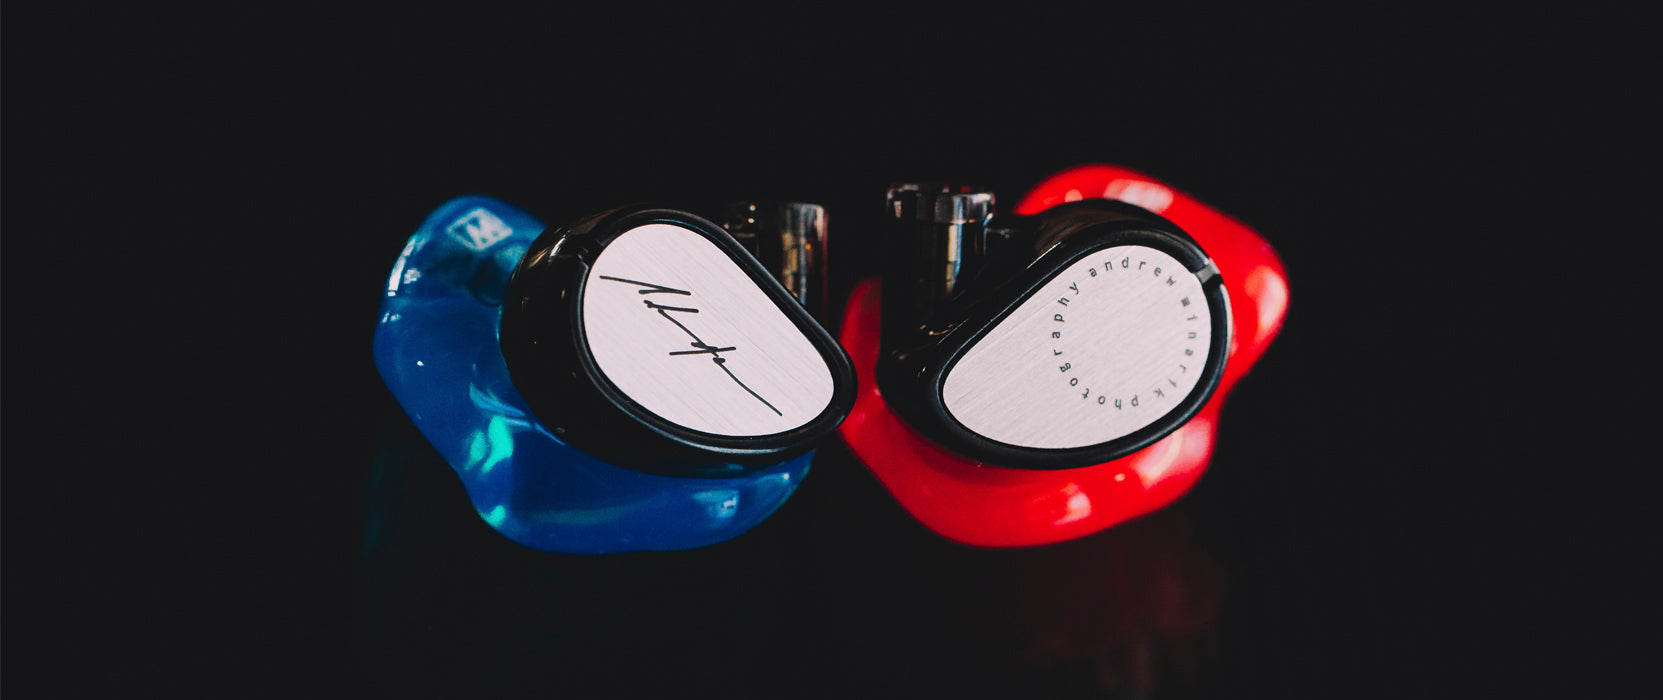 Two custom in-ear monitors, one red and one blue, with white faceplates featuring logo engravings, set against a black background.